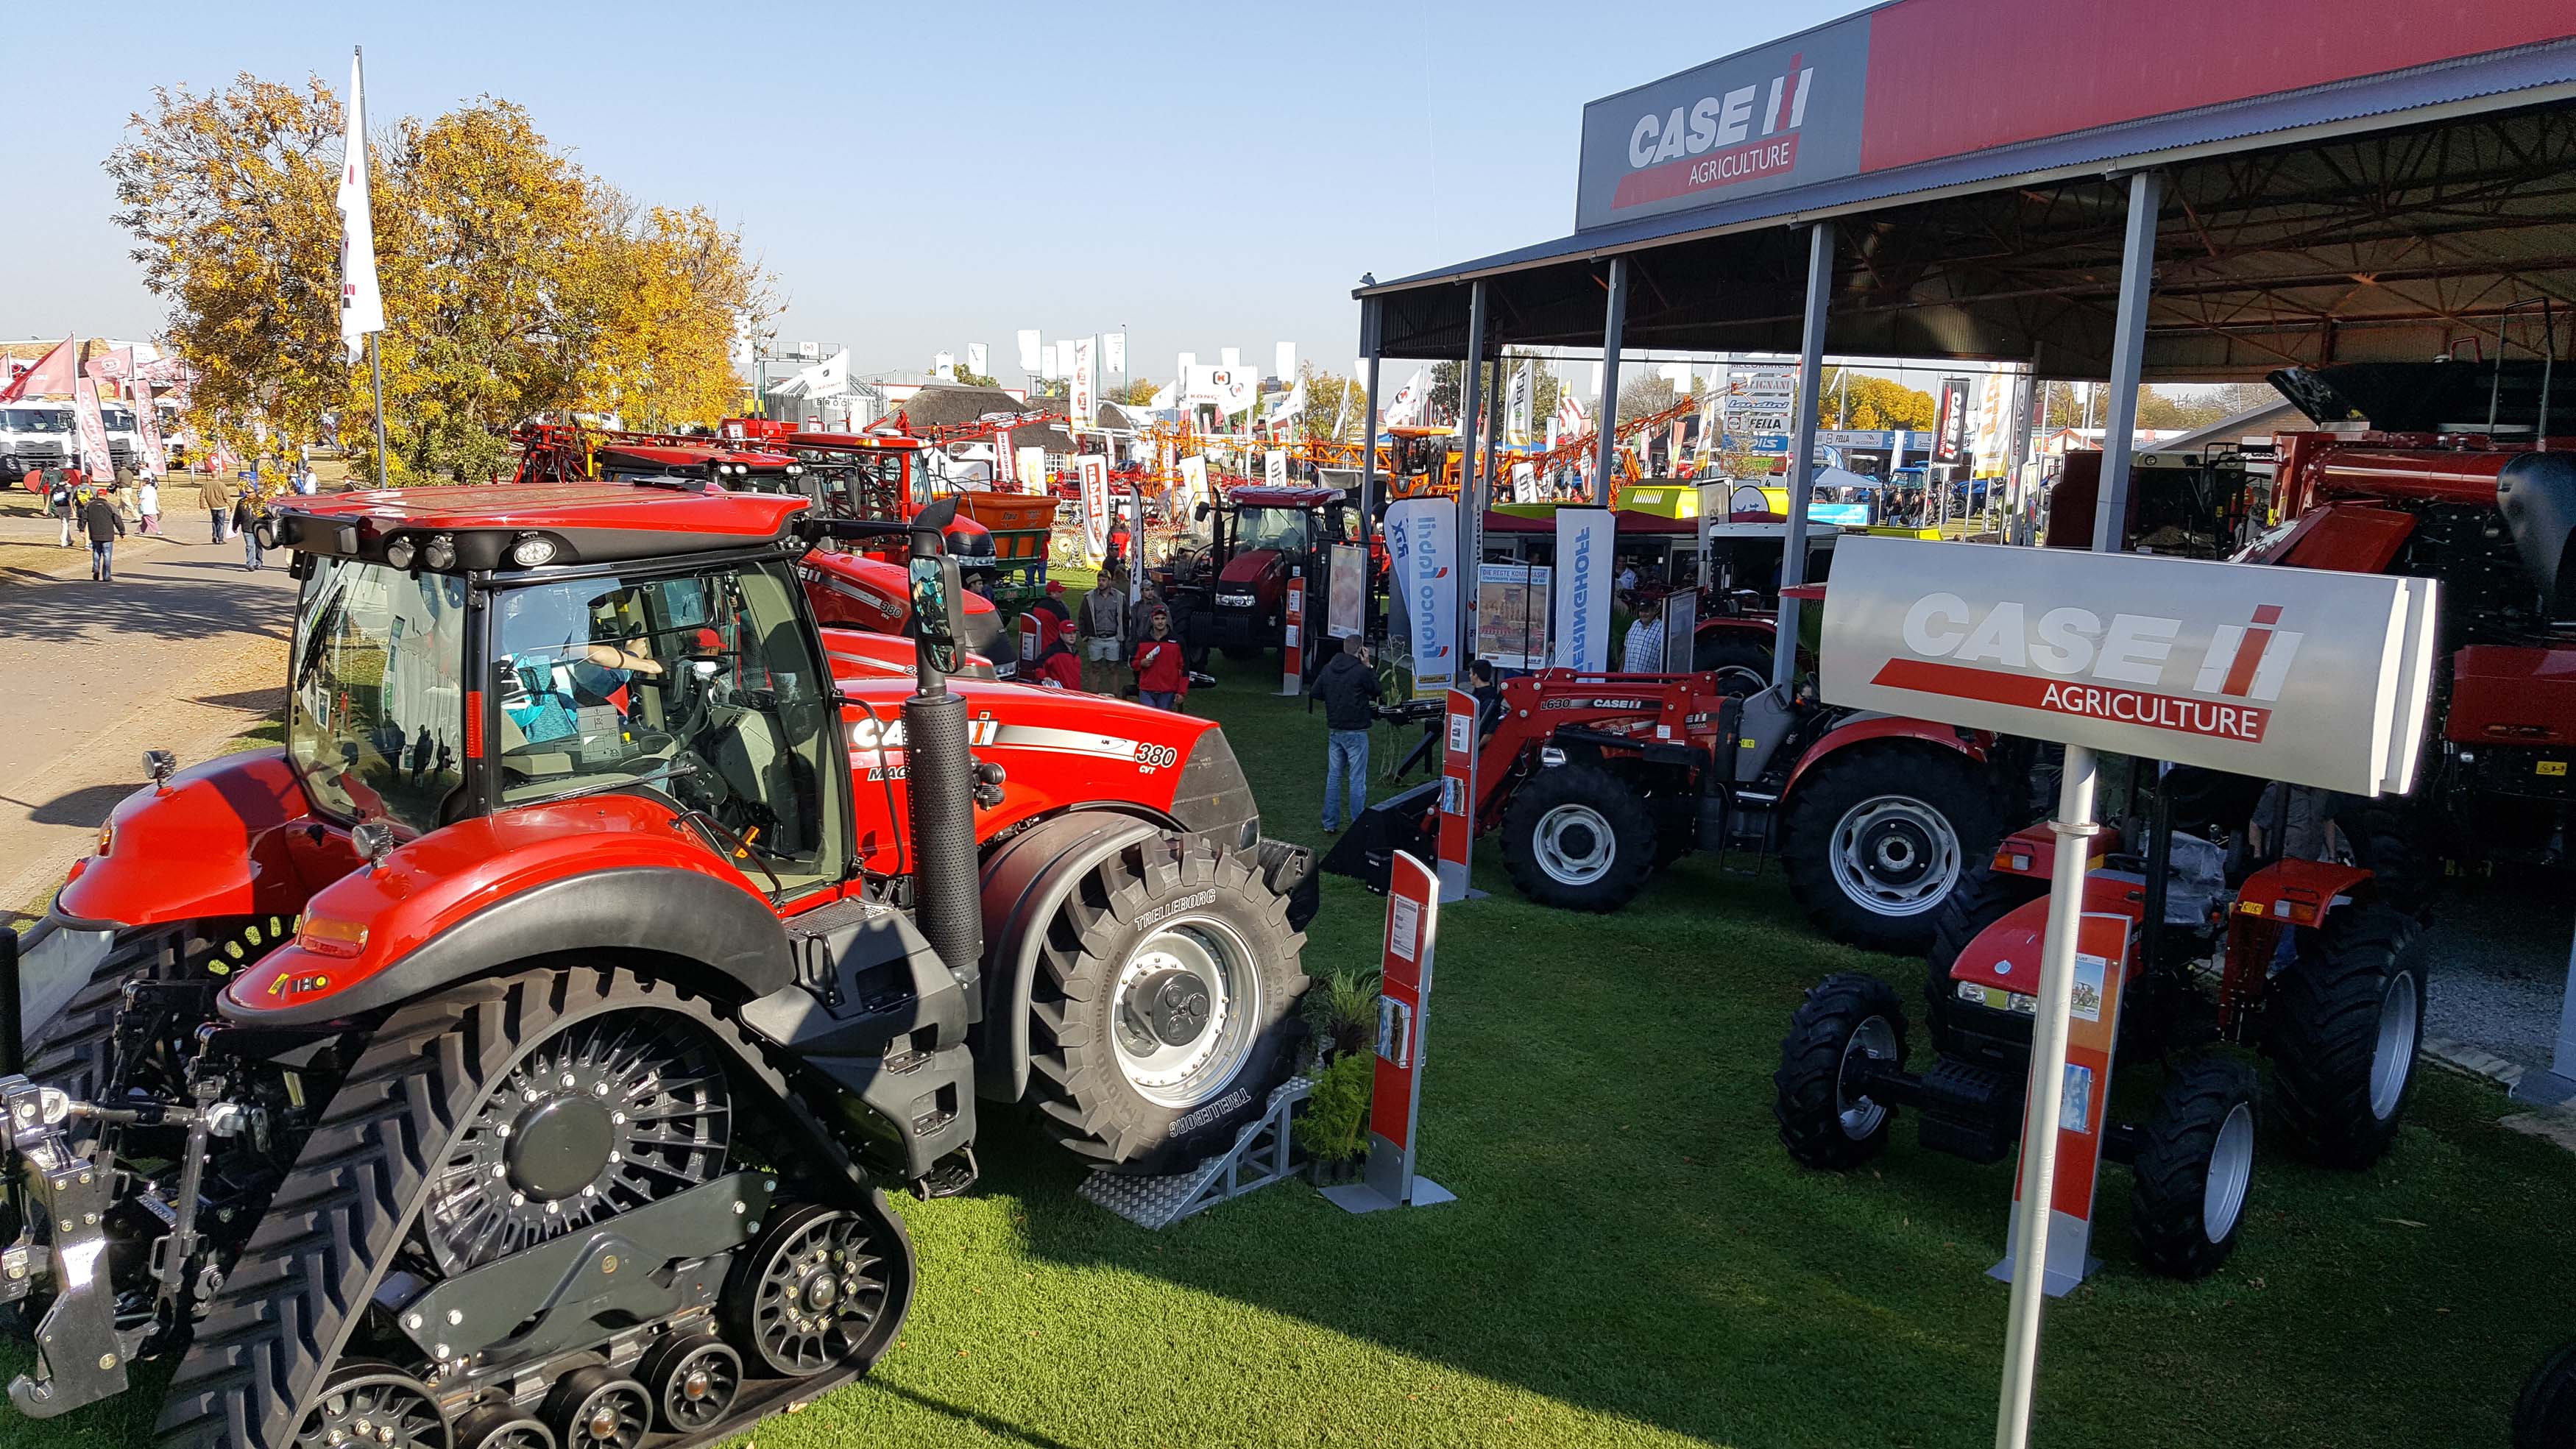 CASE IH TAKES PART IN NAMPO HARVEST DAY IN SOUTH AFRICA